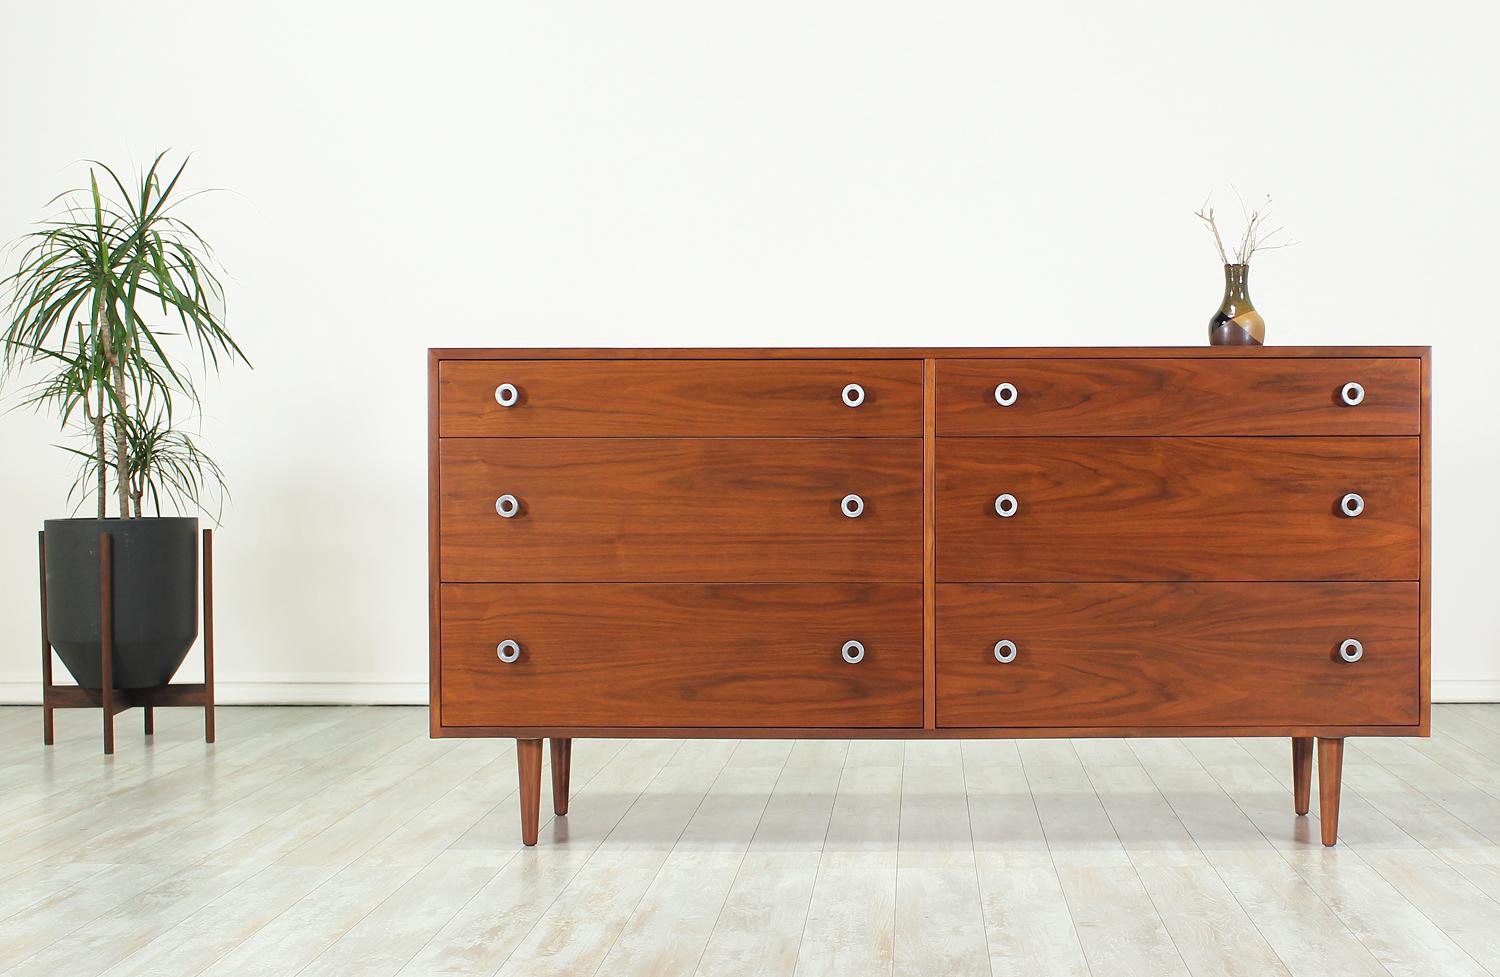 Beautiful dresser designed by Greta M. Grossman for Glenn of California in the United States, circa 1950s. This elegant dresser is comprised of walnut wood and features six spacious dovetailed drawers in a case that sits over four sturdy tapered